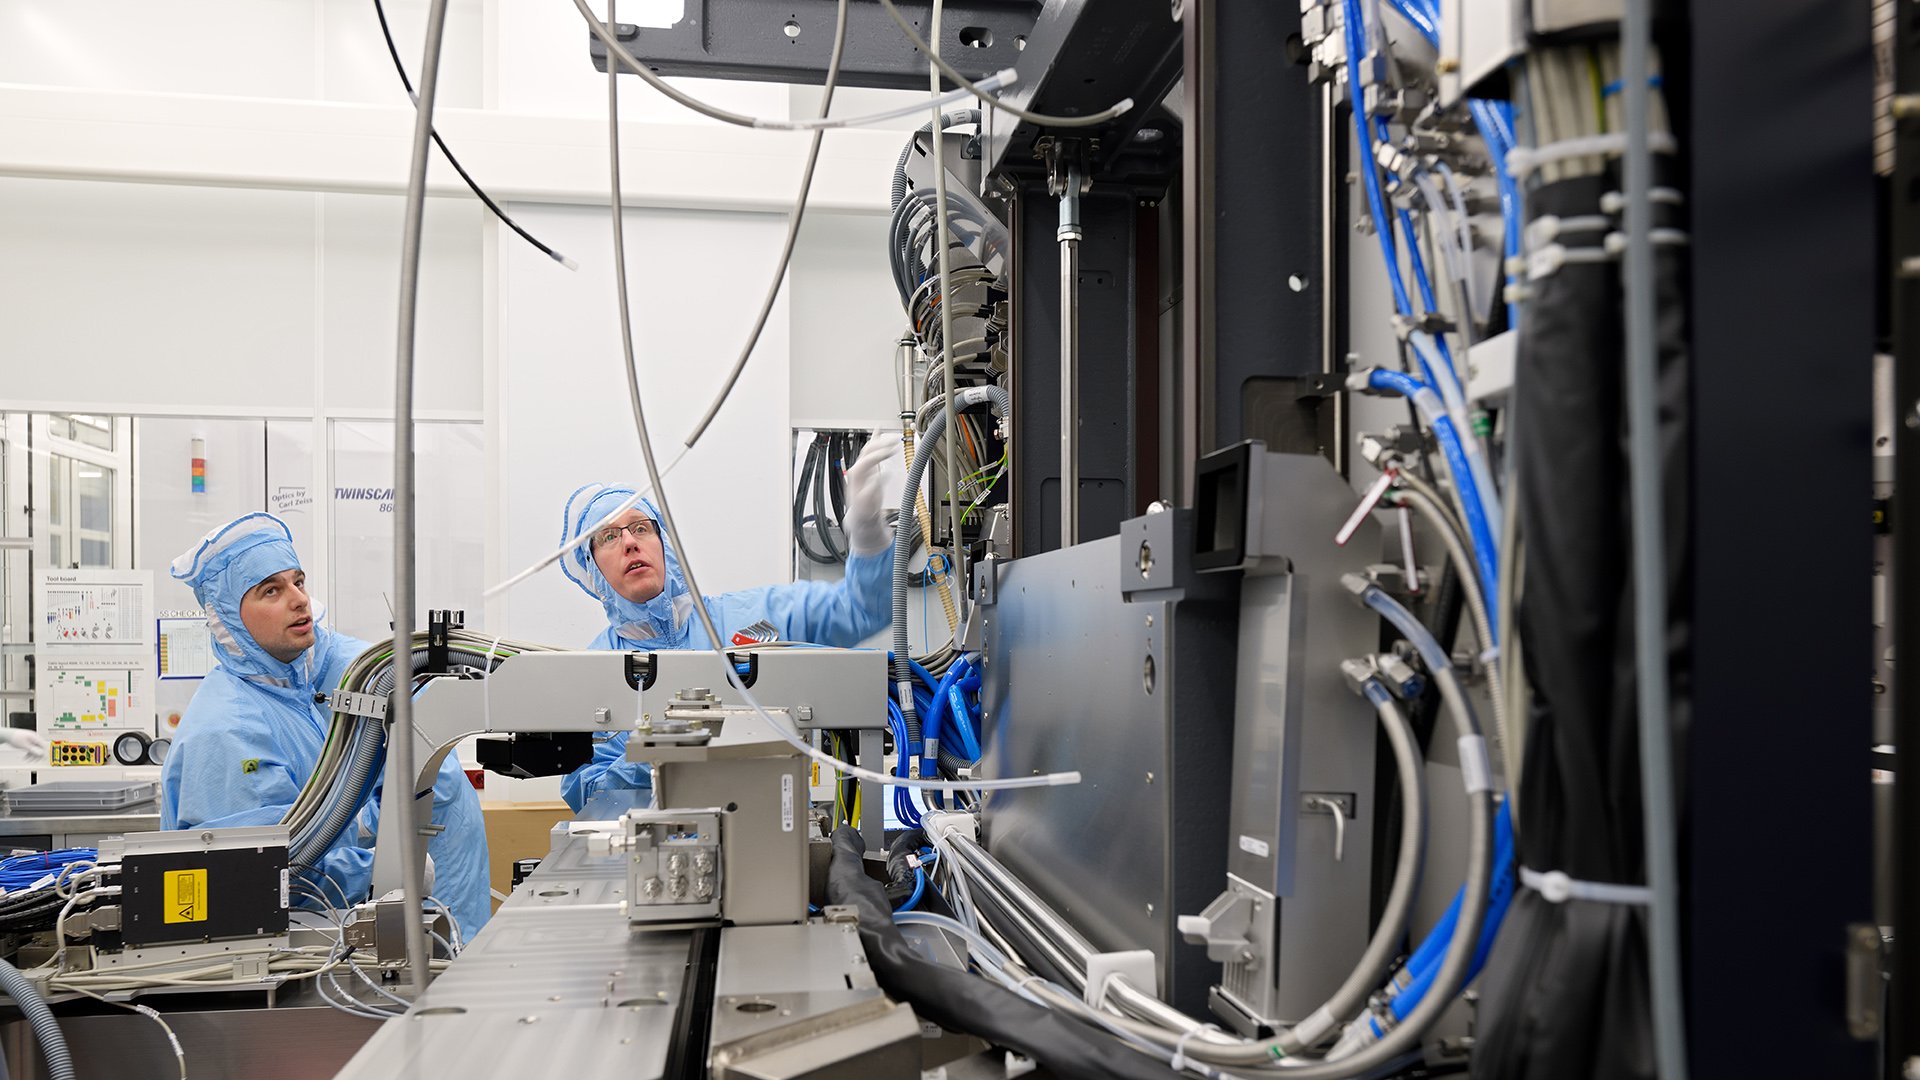 Two ASML technicians wearing blue cleanroom suits examine a lithography machine.